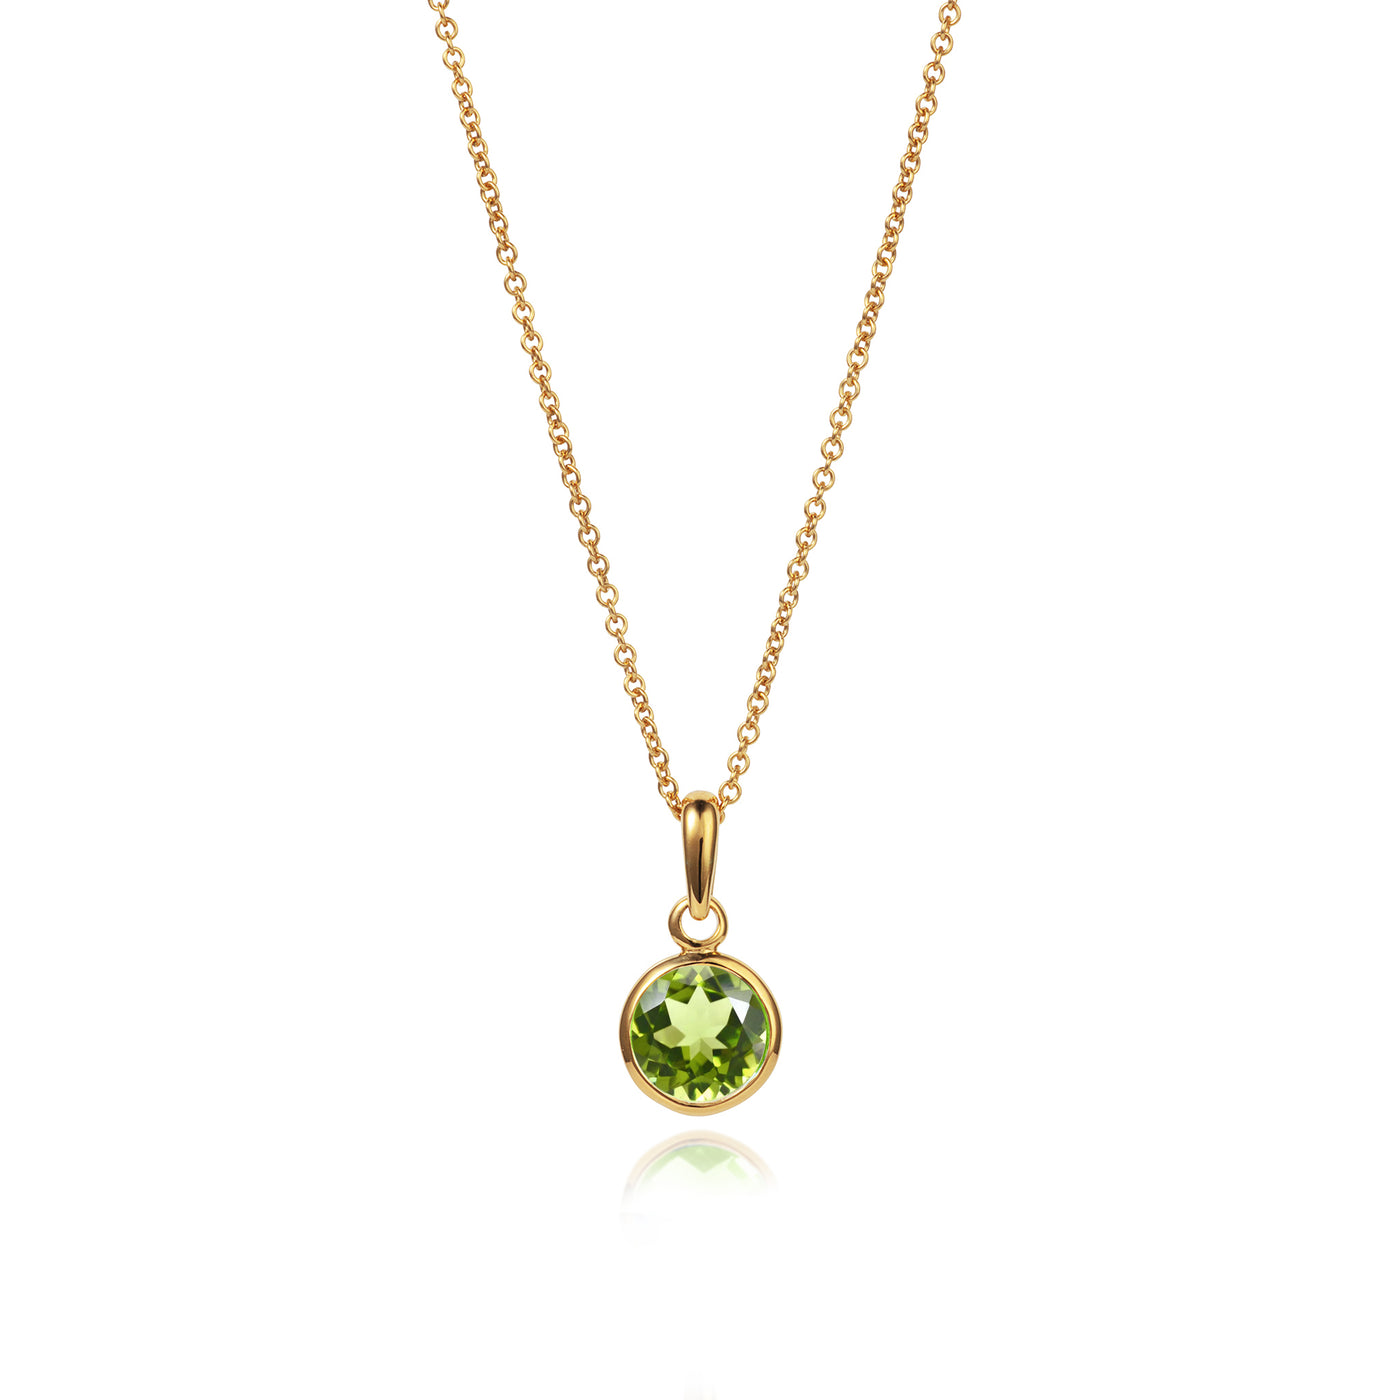 August Birthstone Necklace in Peridot and Gold